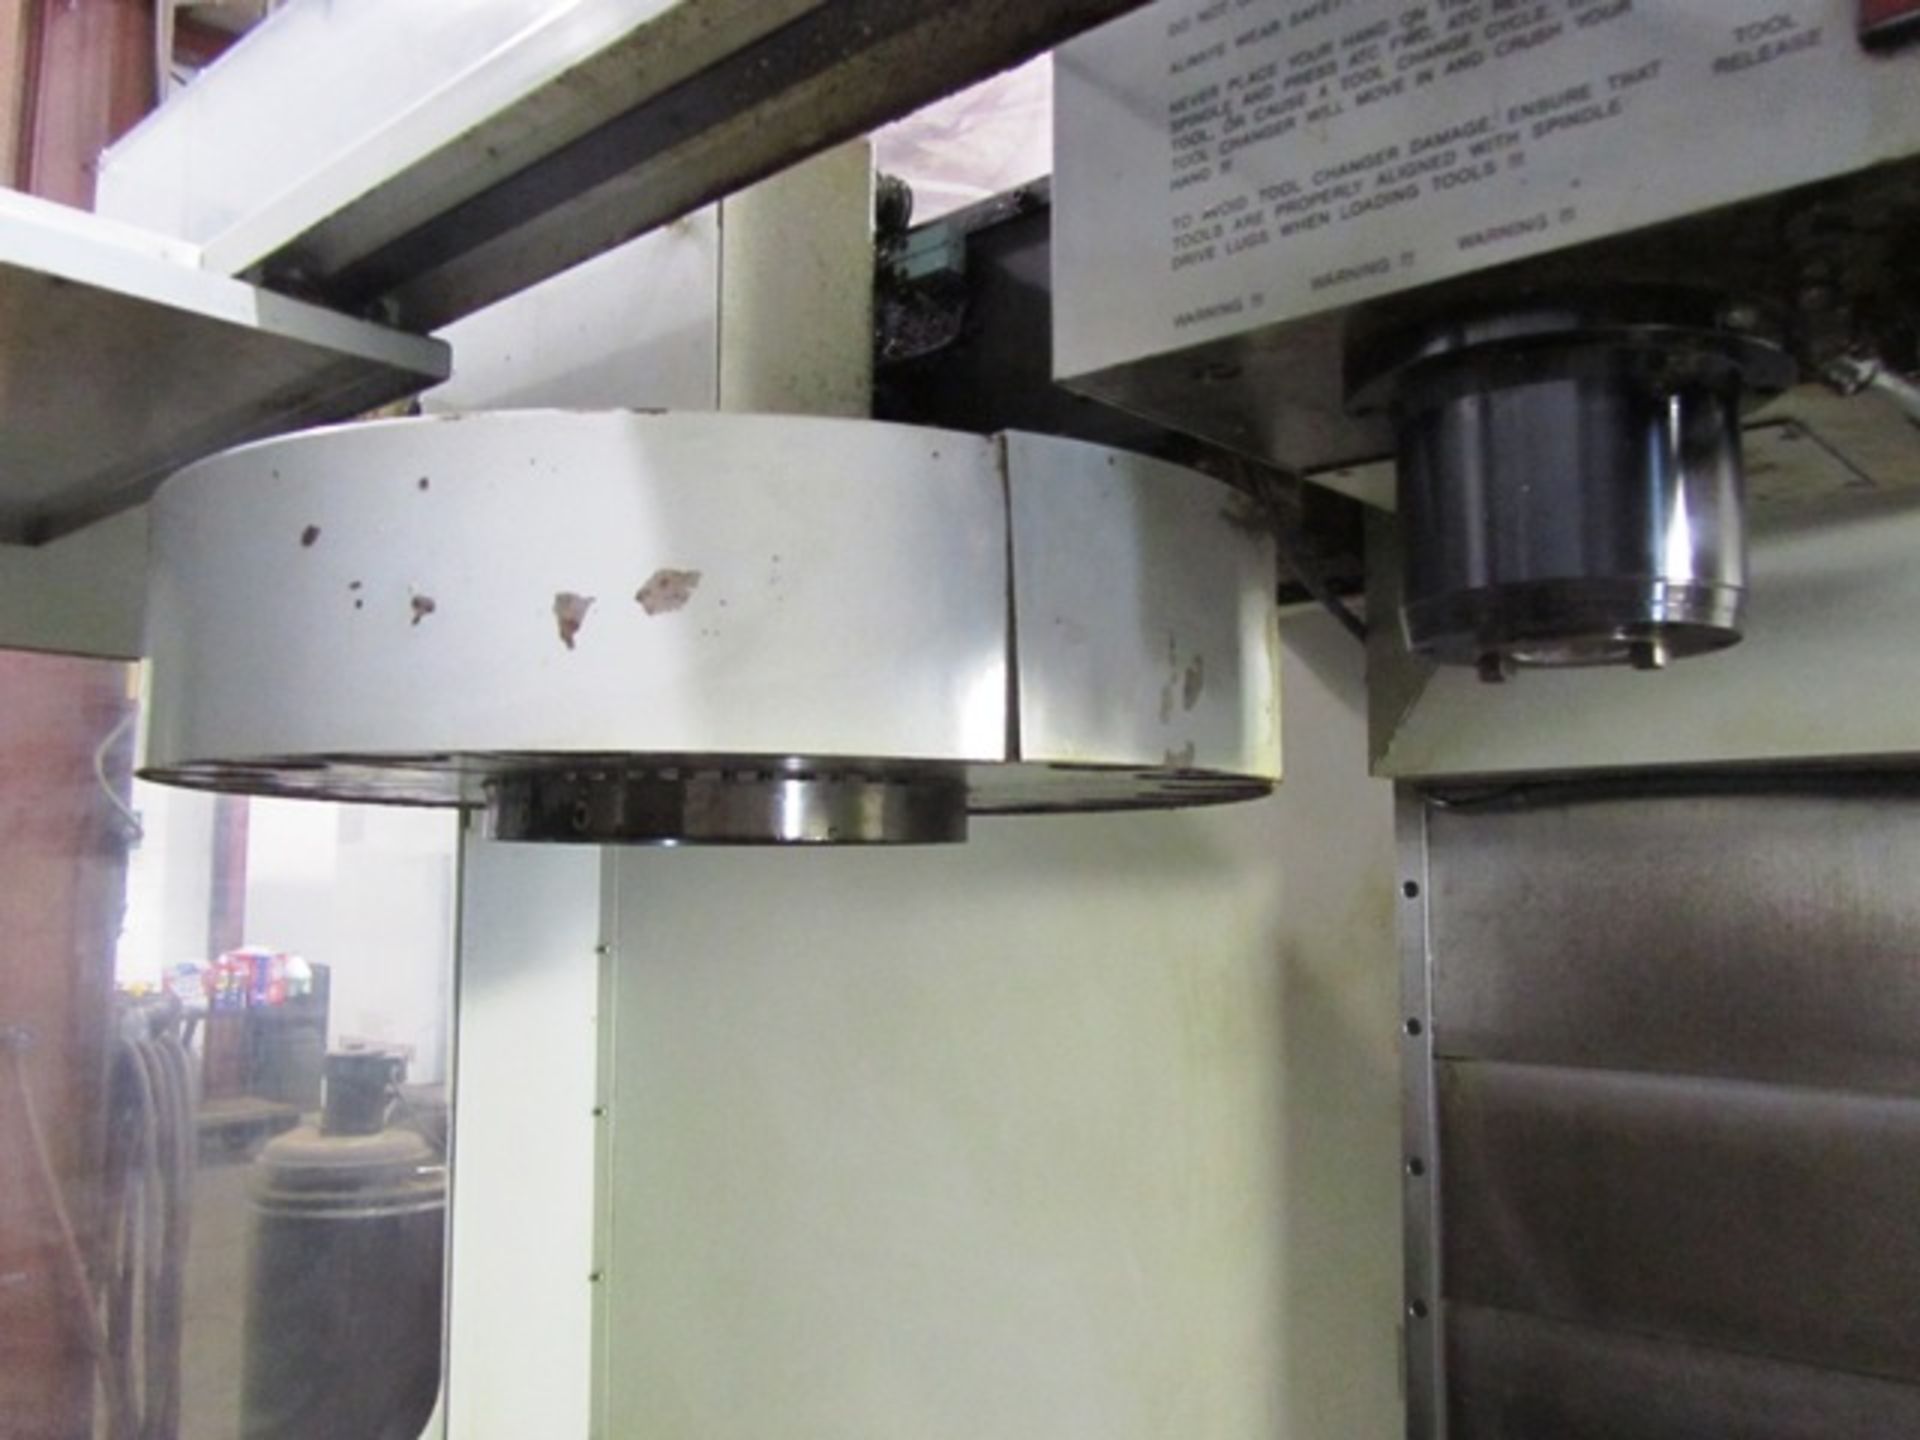 Haas VF3 CNC 4-Axis Vertical Machining Center with 48" x 18" Table, 40"-X, 20"-Y, 25"-Z-Axis - Image 4 of 4